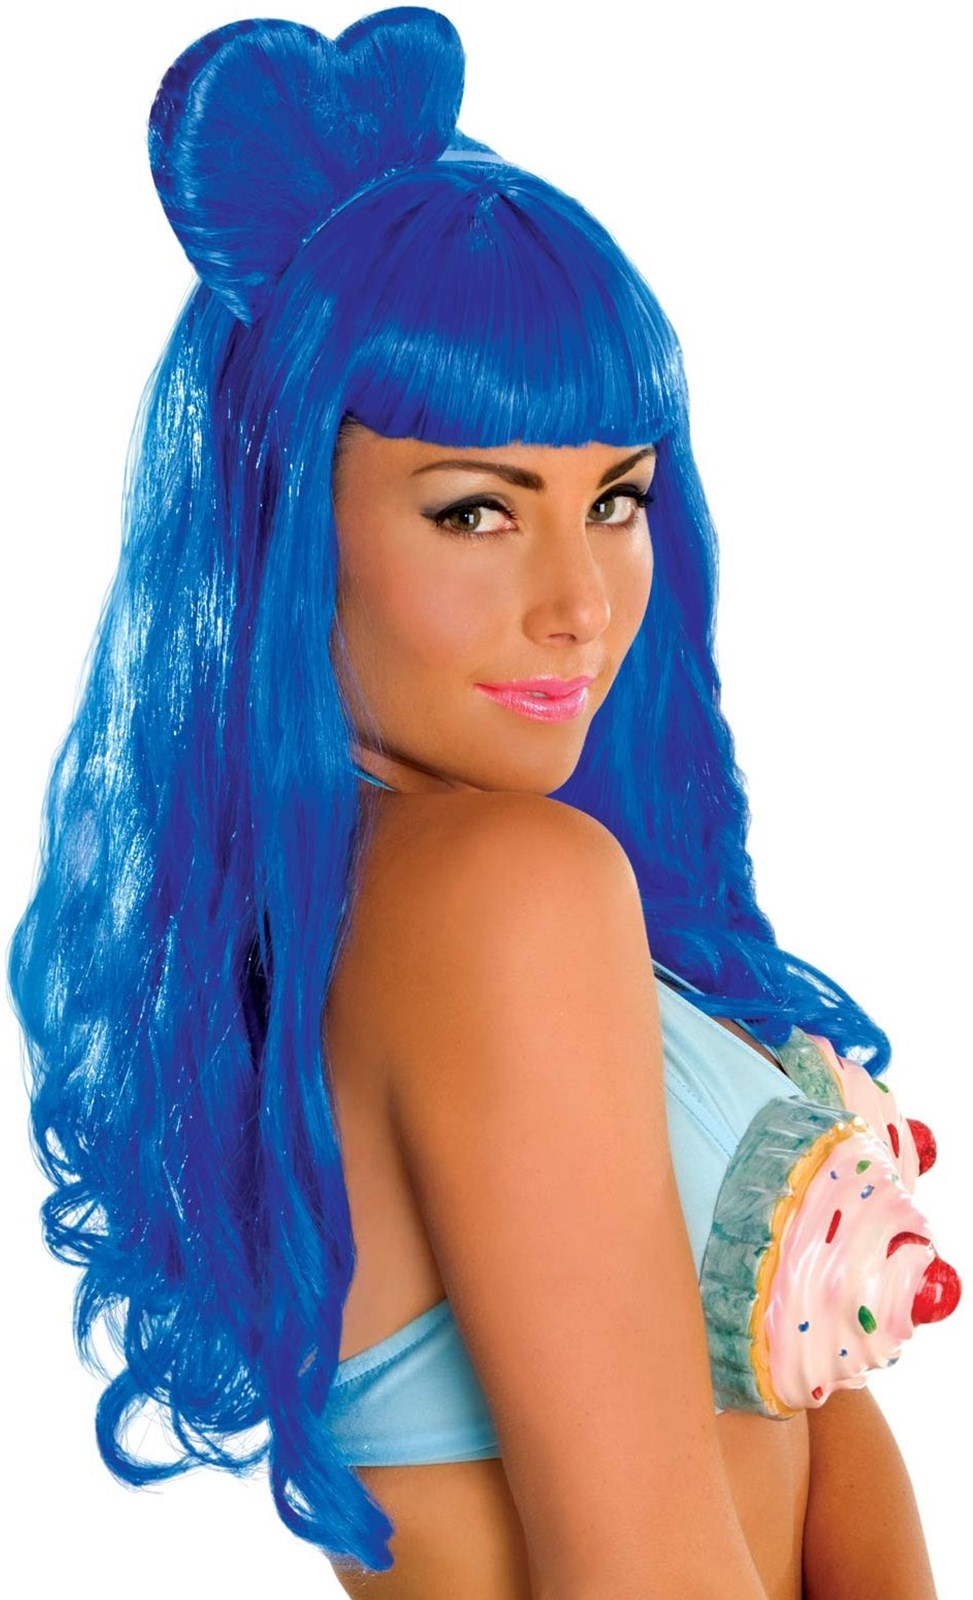 Katy Perry - California Gurl Blue Wig (Adult)